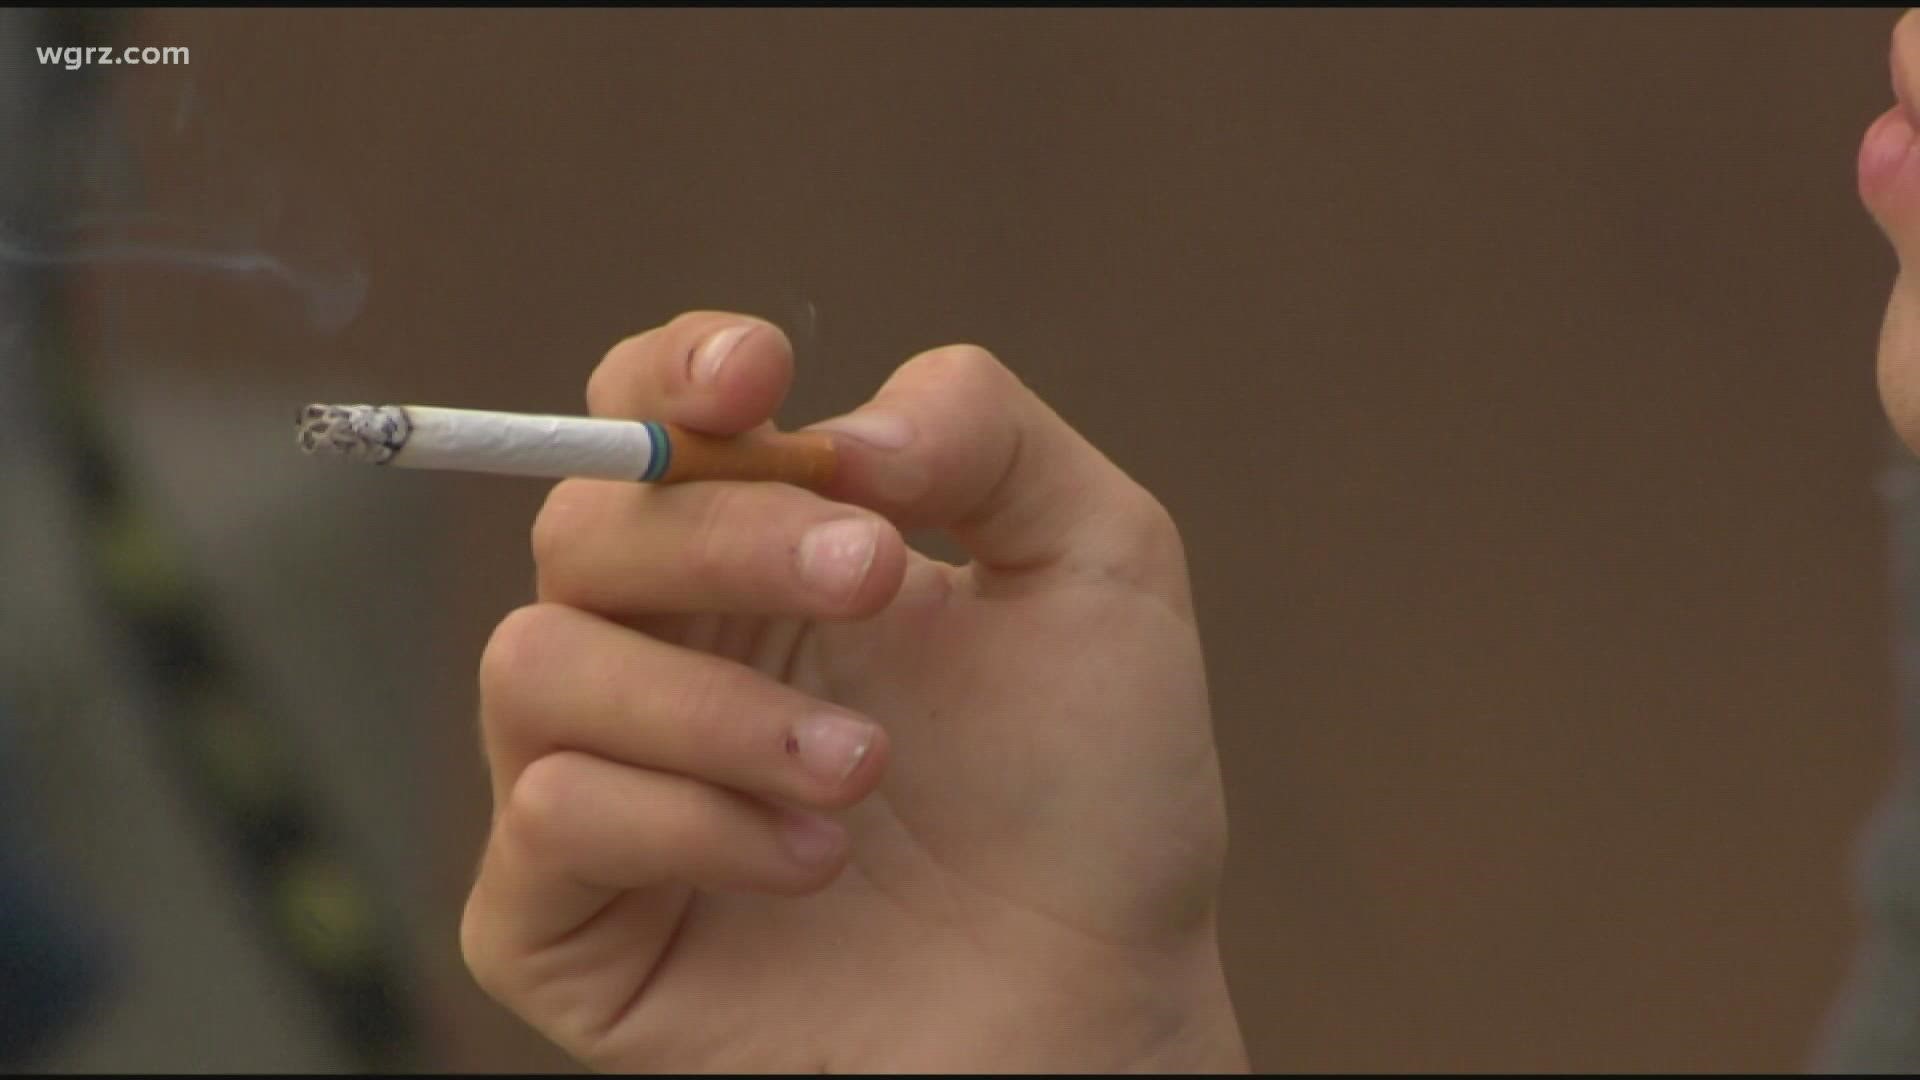 less than three percent of high schoolers across the state smoked cigarettes in 2020.